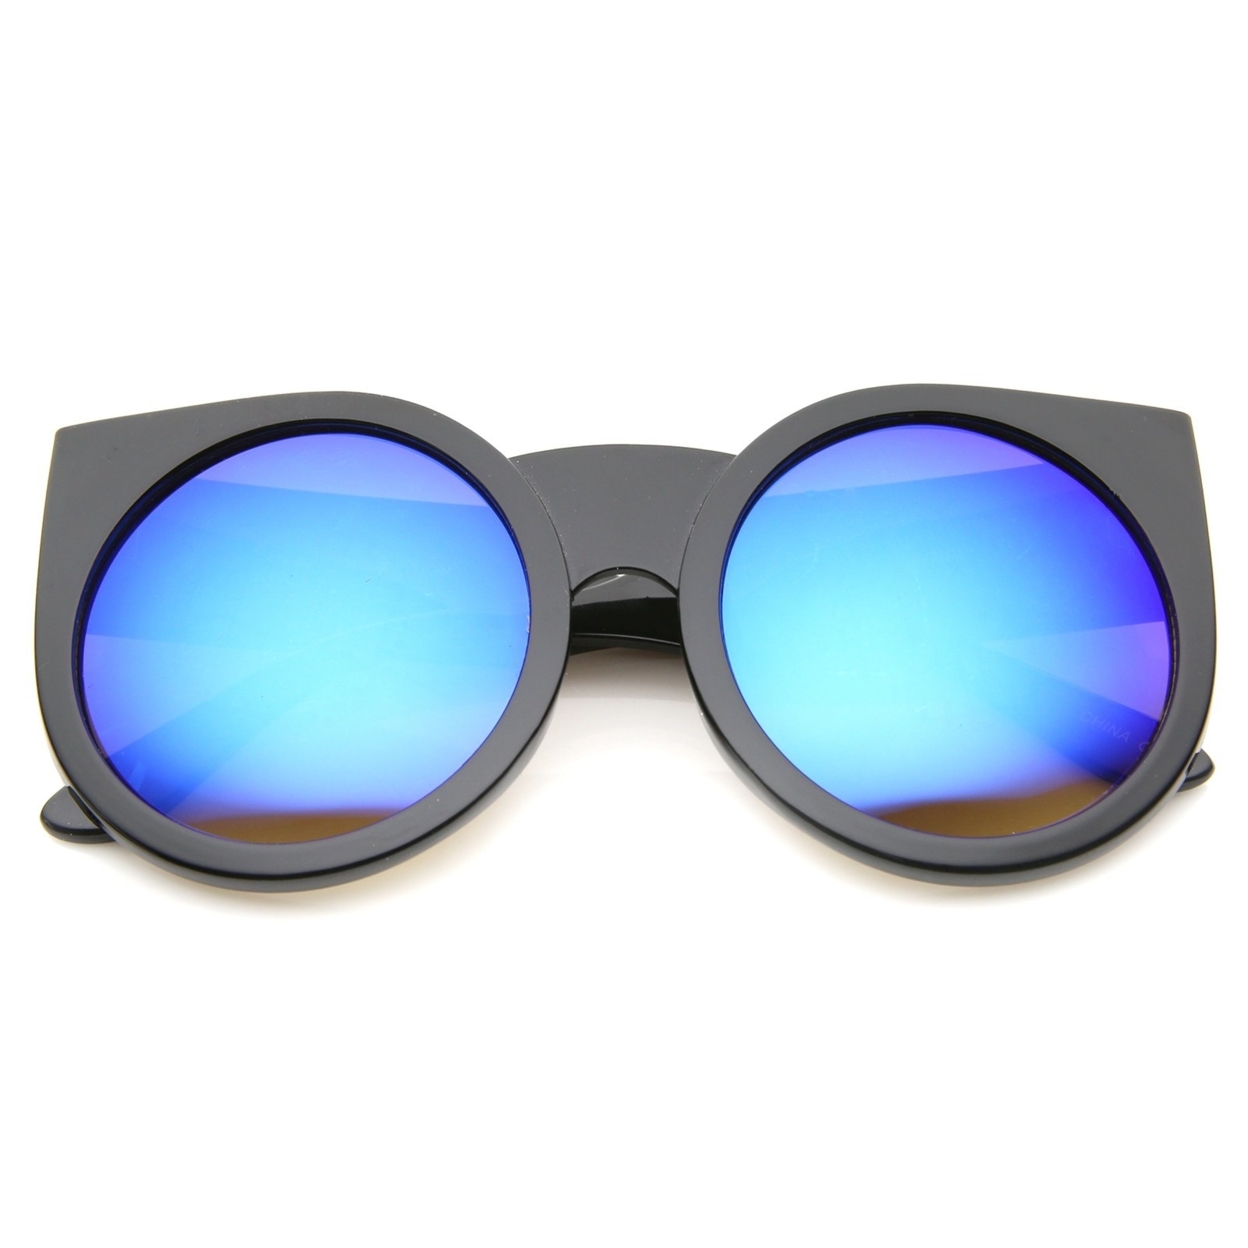 Womens Thick Frame Color Mirror Lens Round Cat Eye Sunglasses 55mm - Black / Blue Mirror